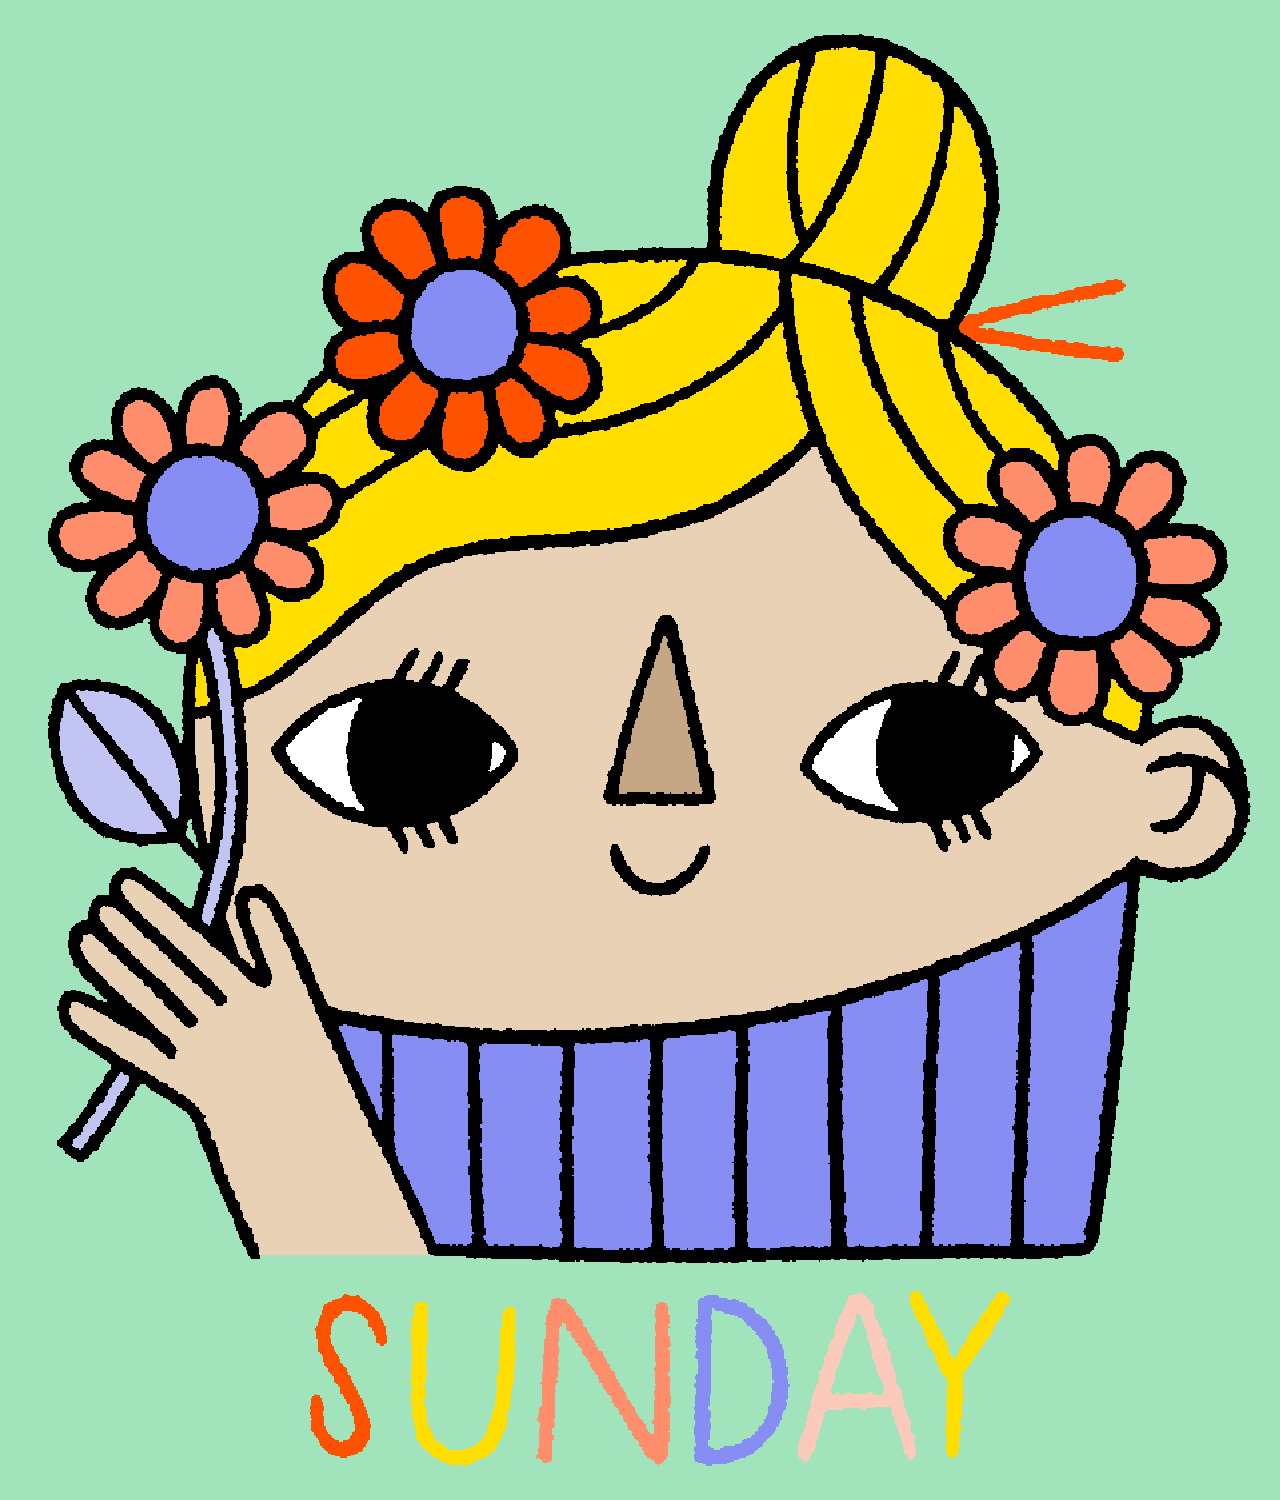 Illustrated gif. Blonde-haired cartoony girl, holding a pink daisy by her face, with daisies tucked into her hair, smiles and winks at us. Text, "Sunday."